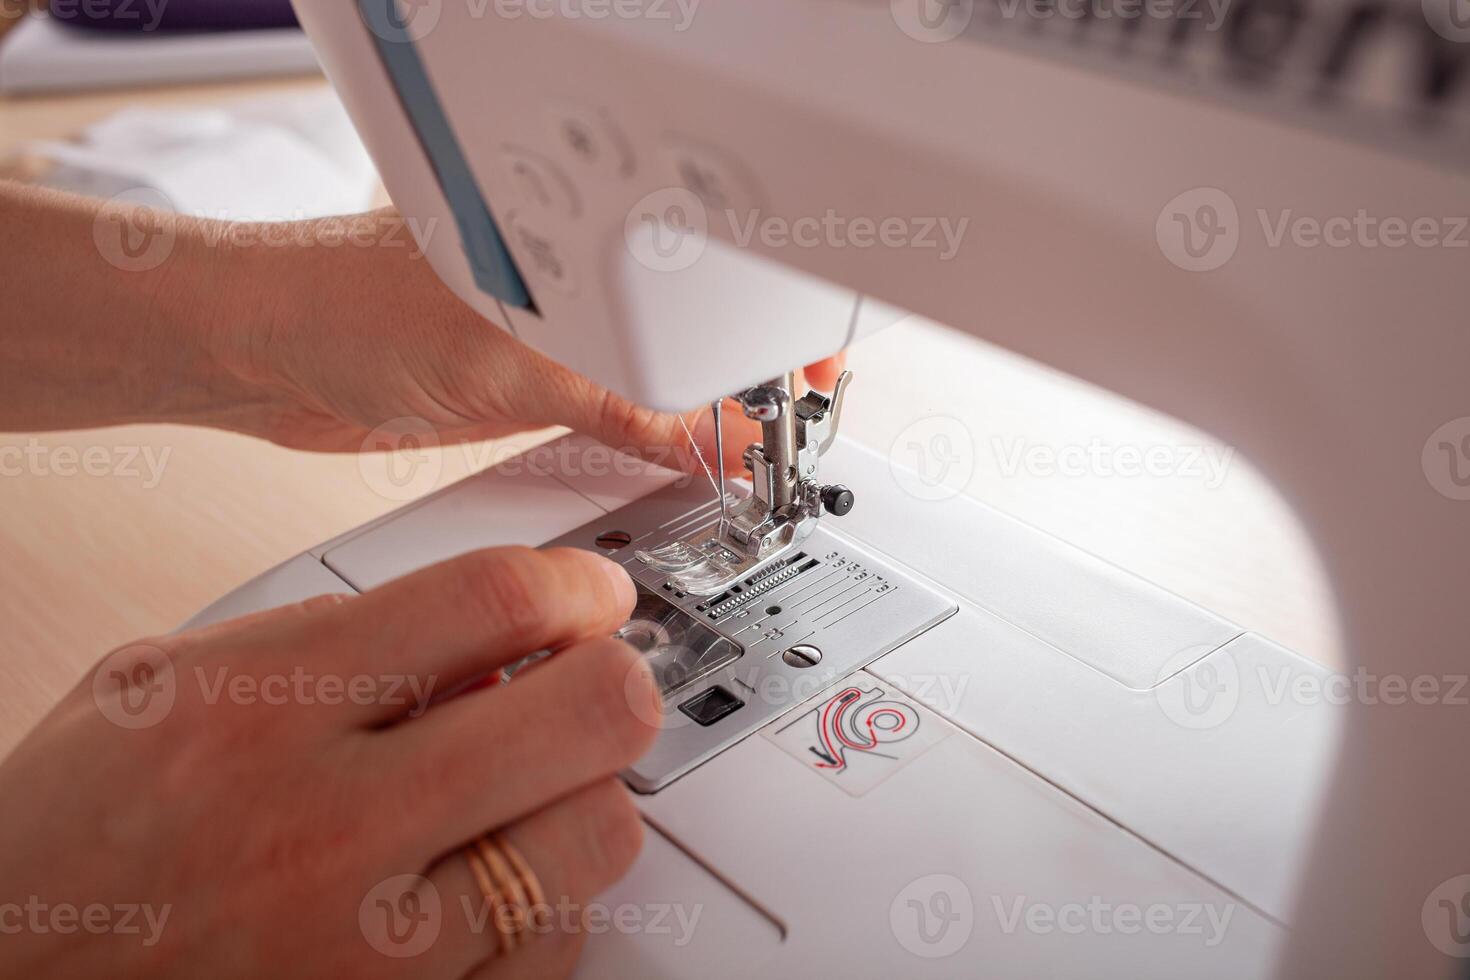 Seamstress at work. Dressmaker making clothes in modern studio. Tailor holding pencil and marking fabric. Woman standing at table with cut textile, sewing machine, thread, pins, needles, tape, cutouts photo